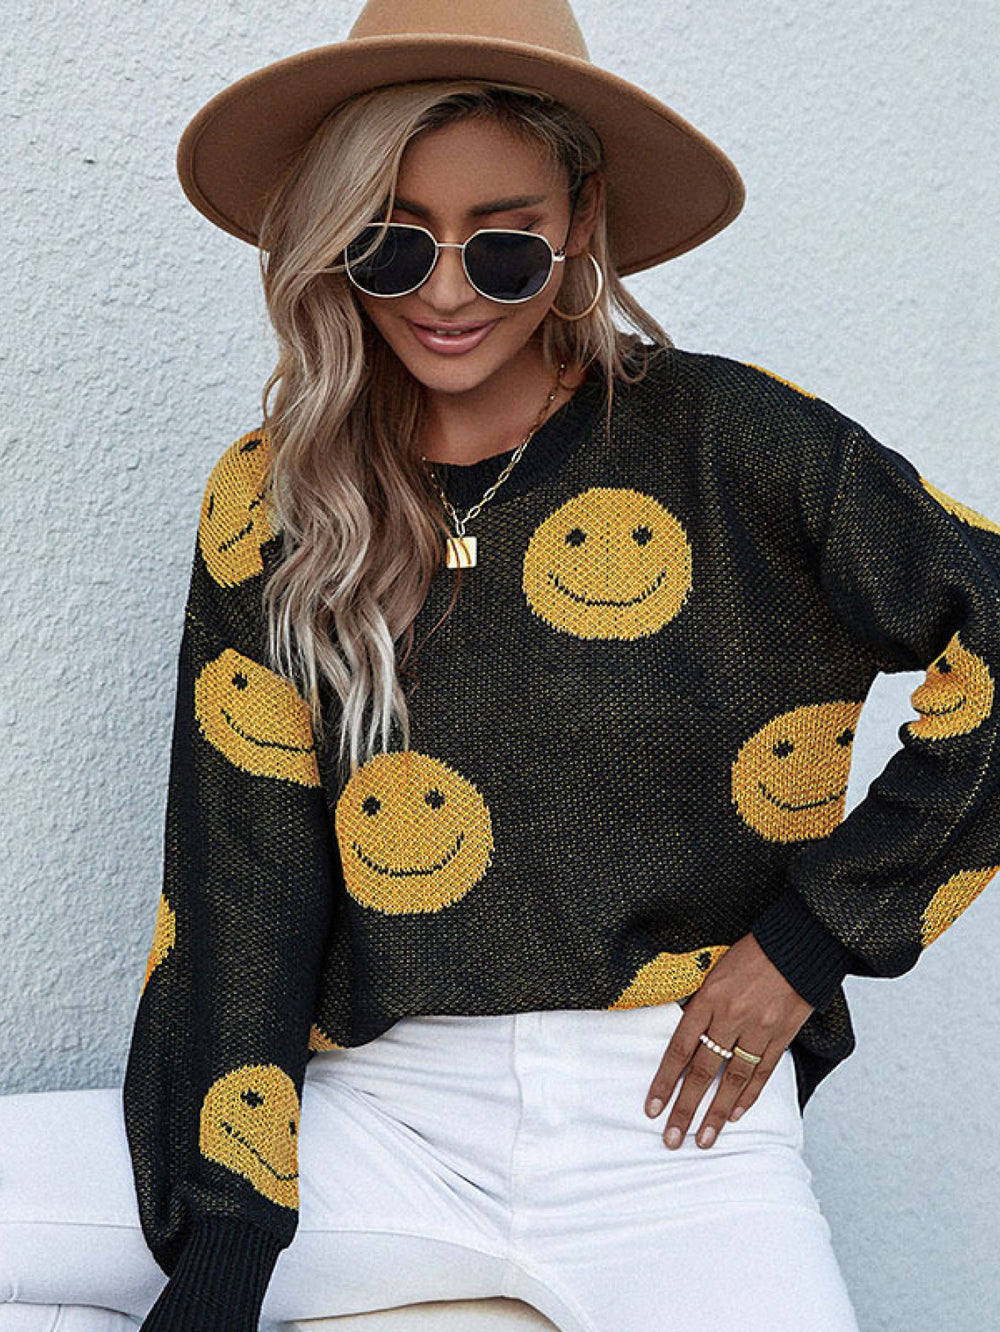 Smiley Face Sweater - Sizes S-L